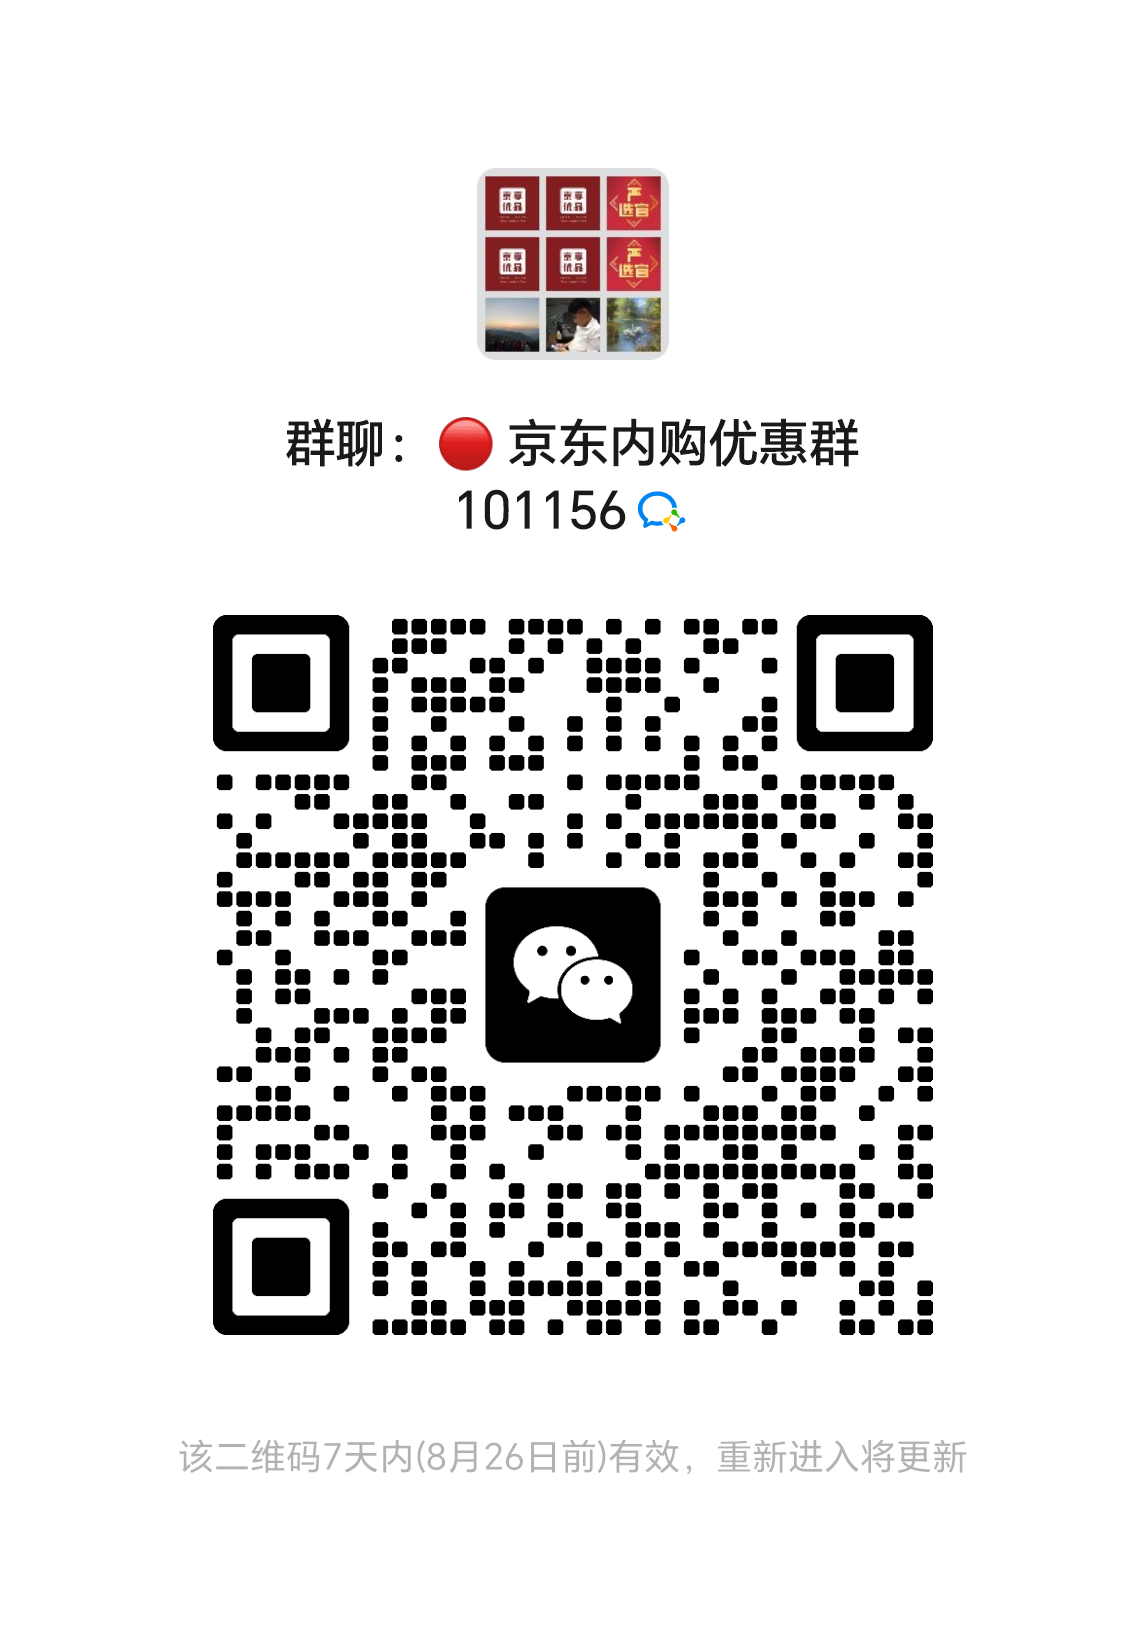 mmqrcode1692456067908.png